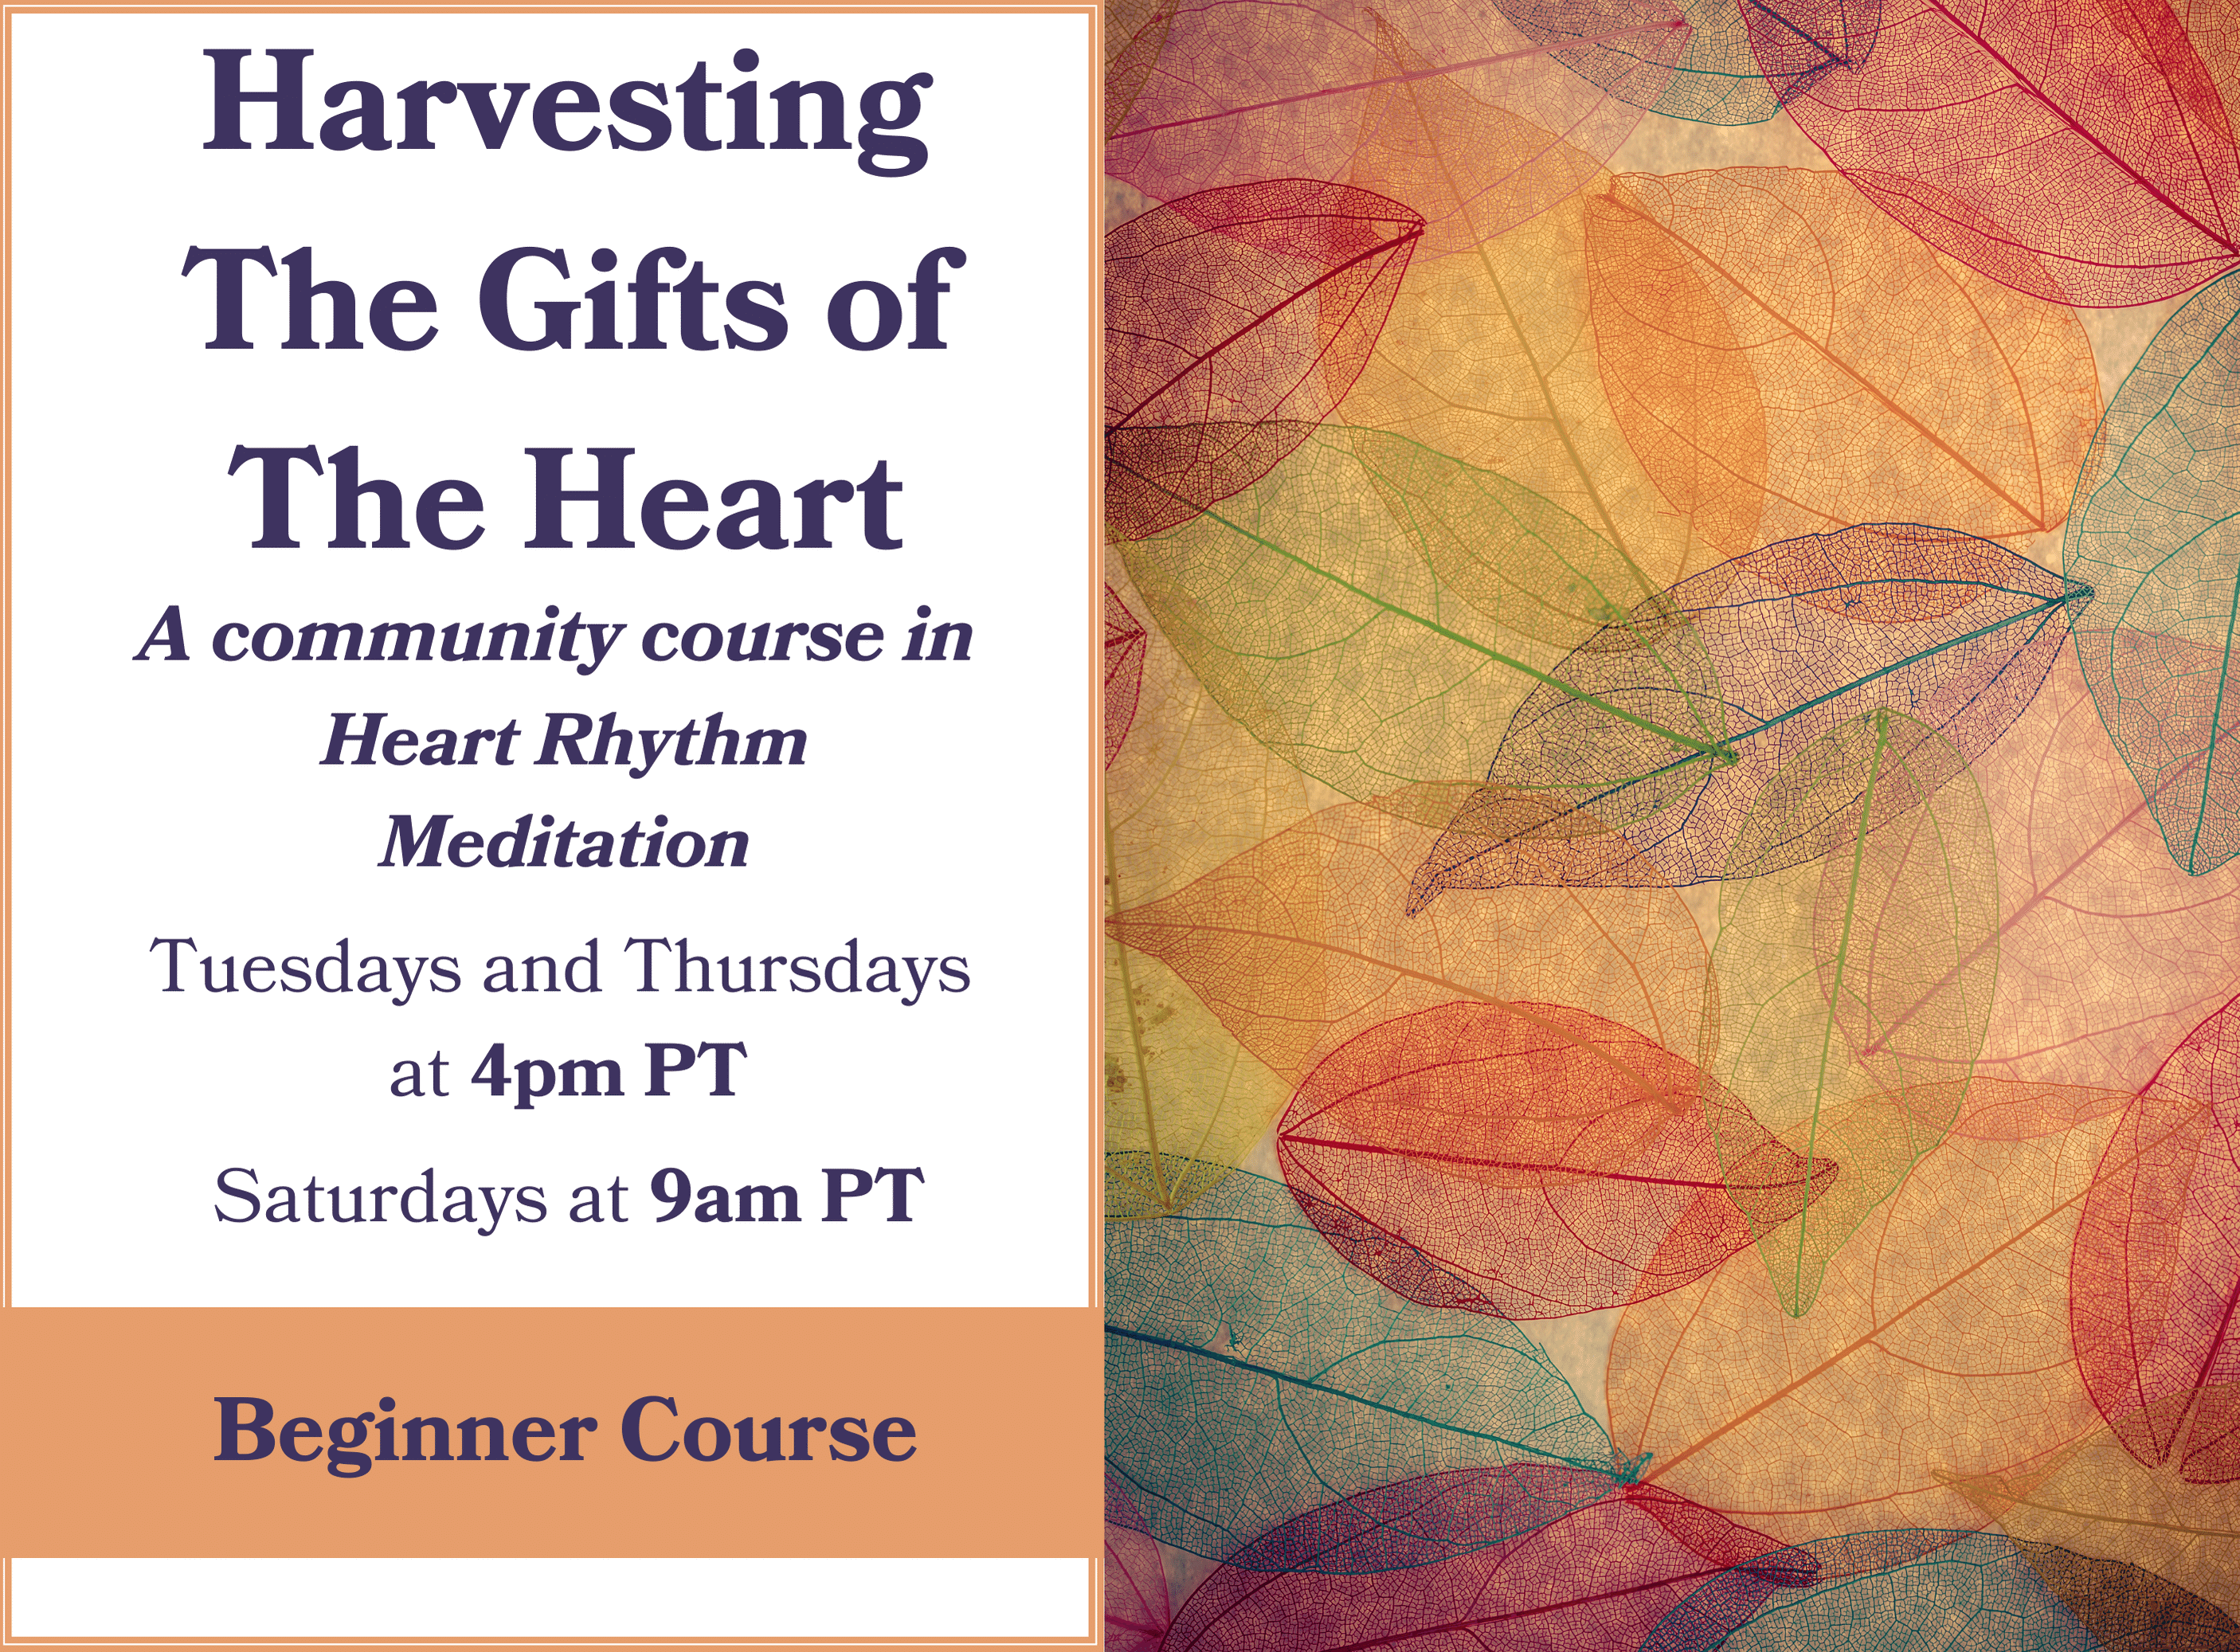 Harvesting The Gifts of The Heart